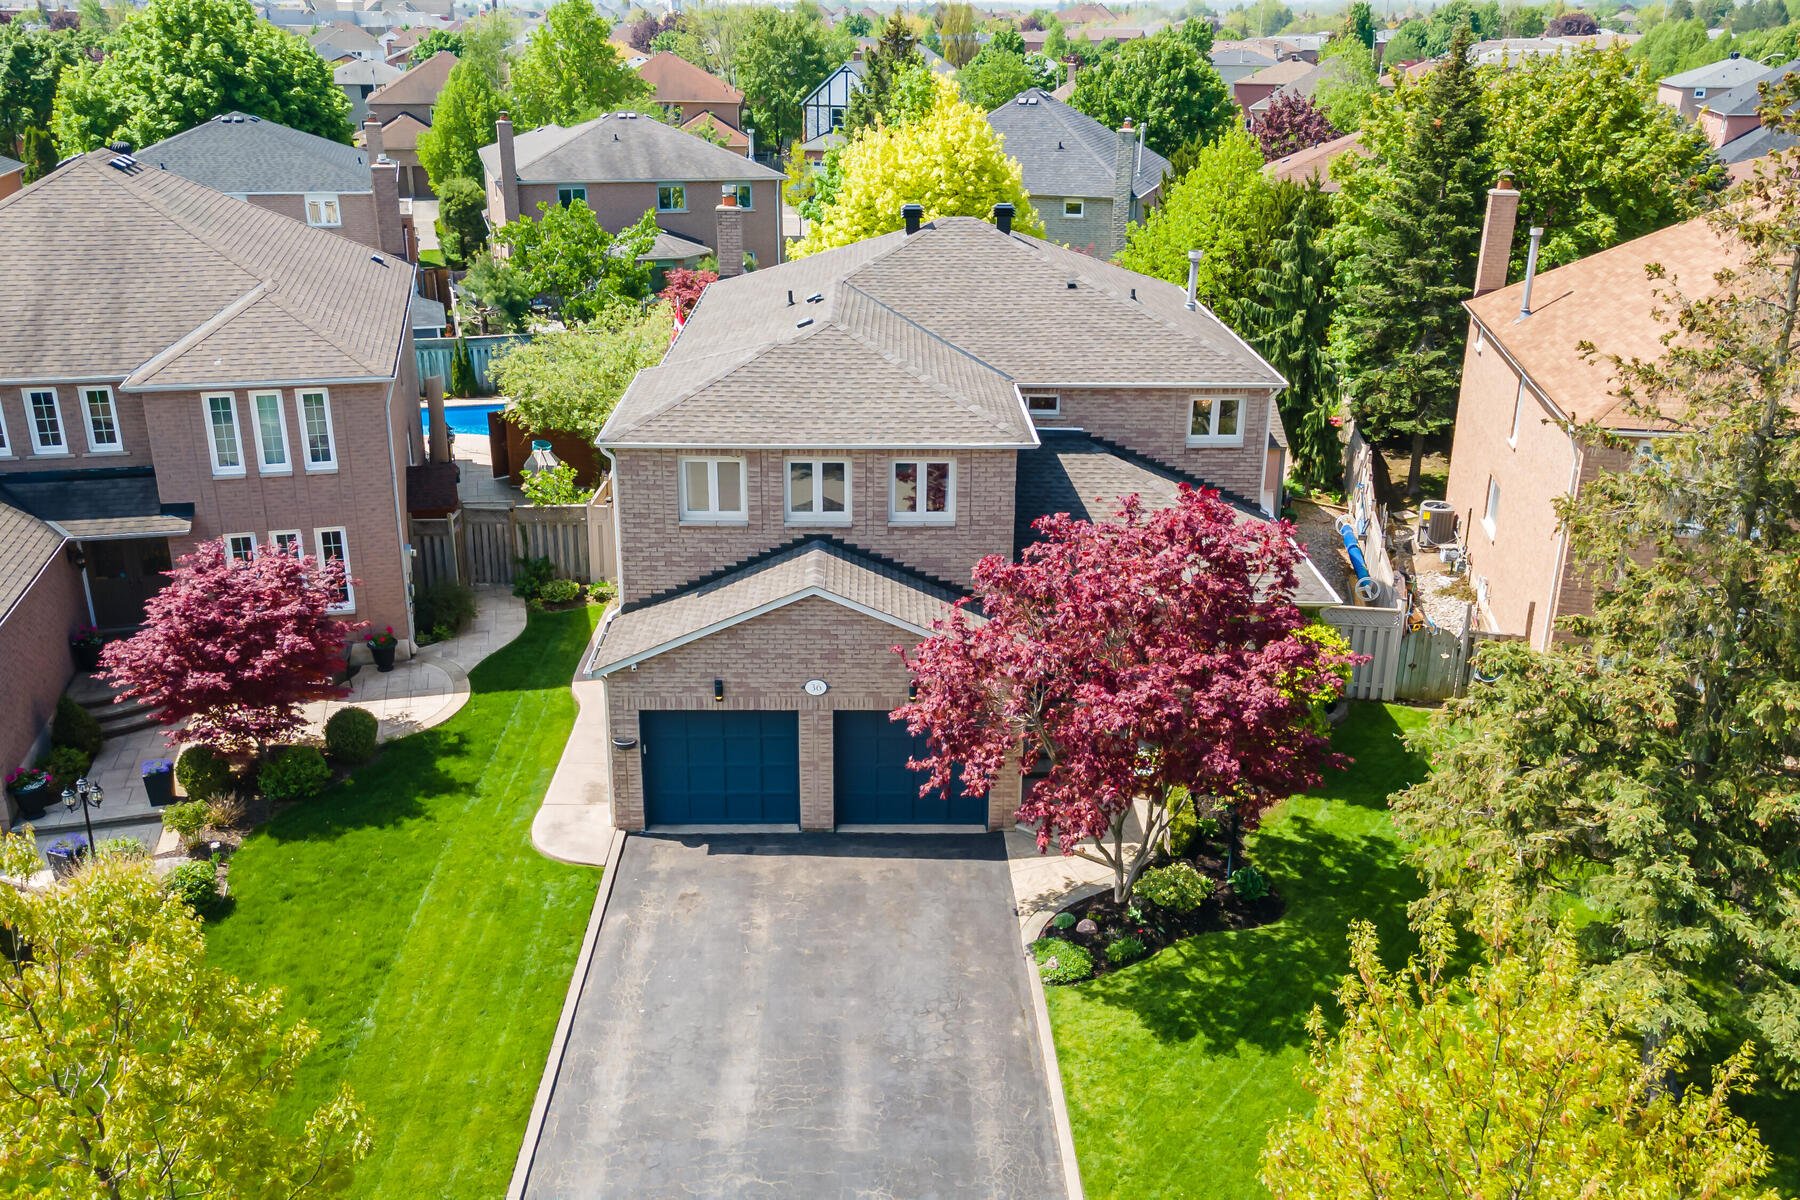 36 Treanor Cres Georgetown ON L7G 5H9 Canada-008-015-Aerial-MLS_Size.jpg